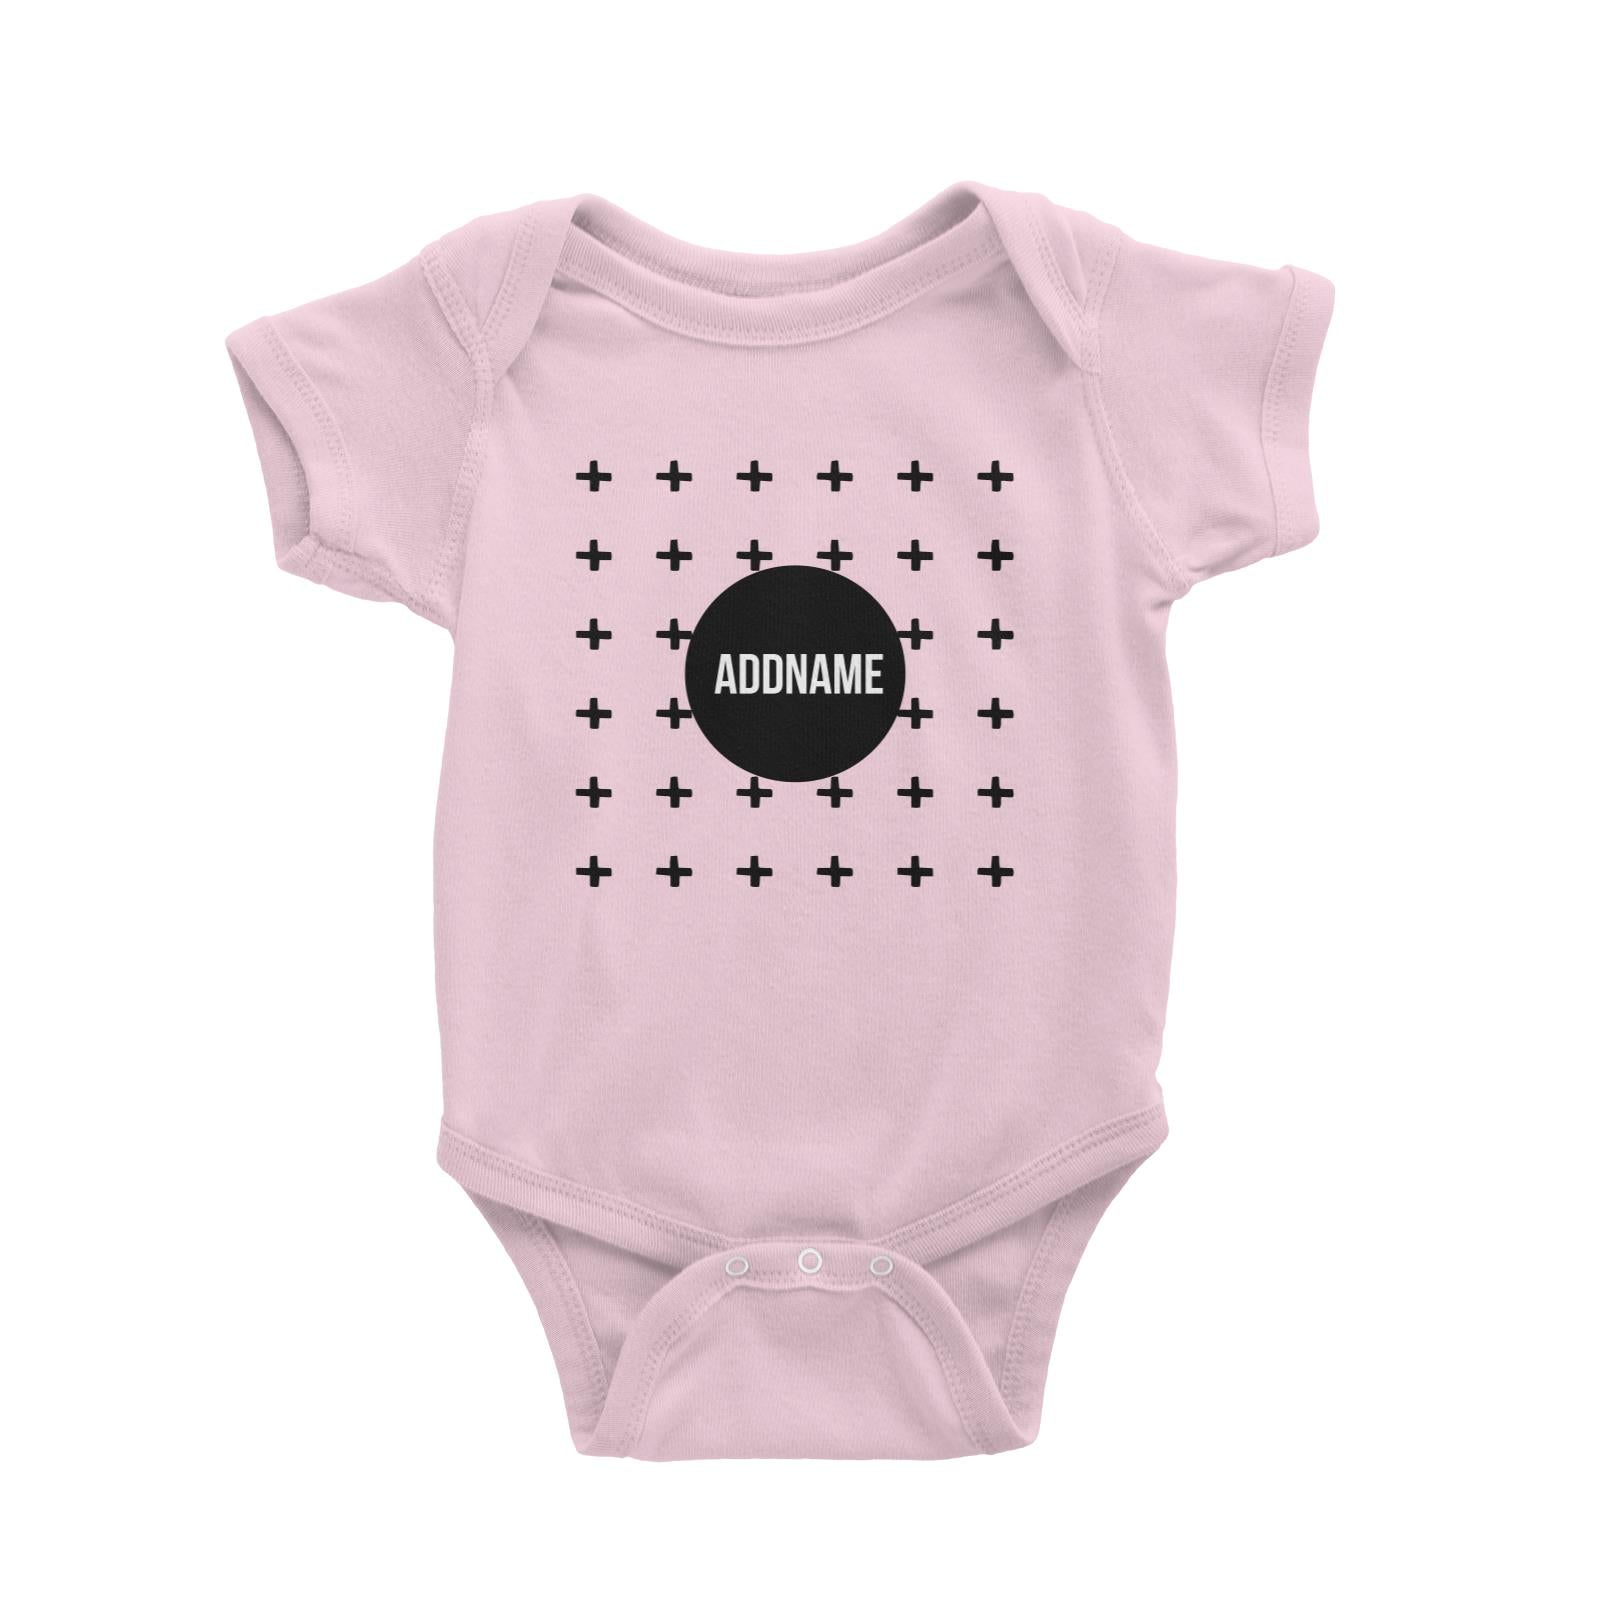 Monochrome Black Circle with Crosses Addname Baby Romper